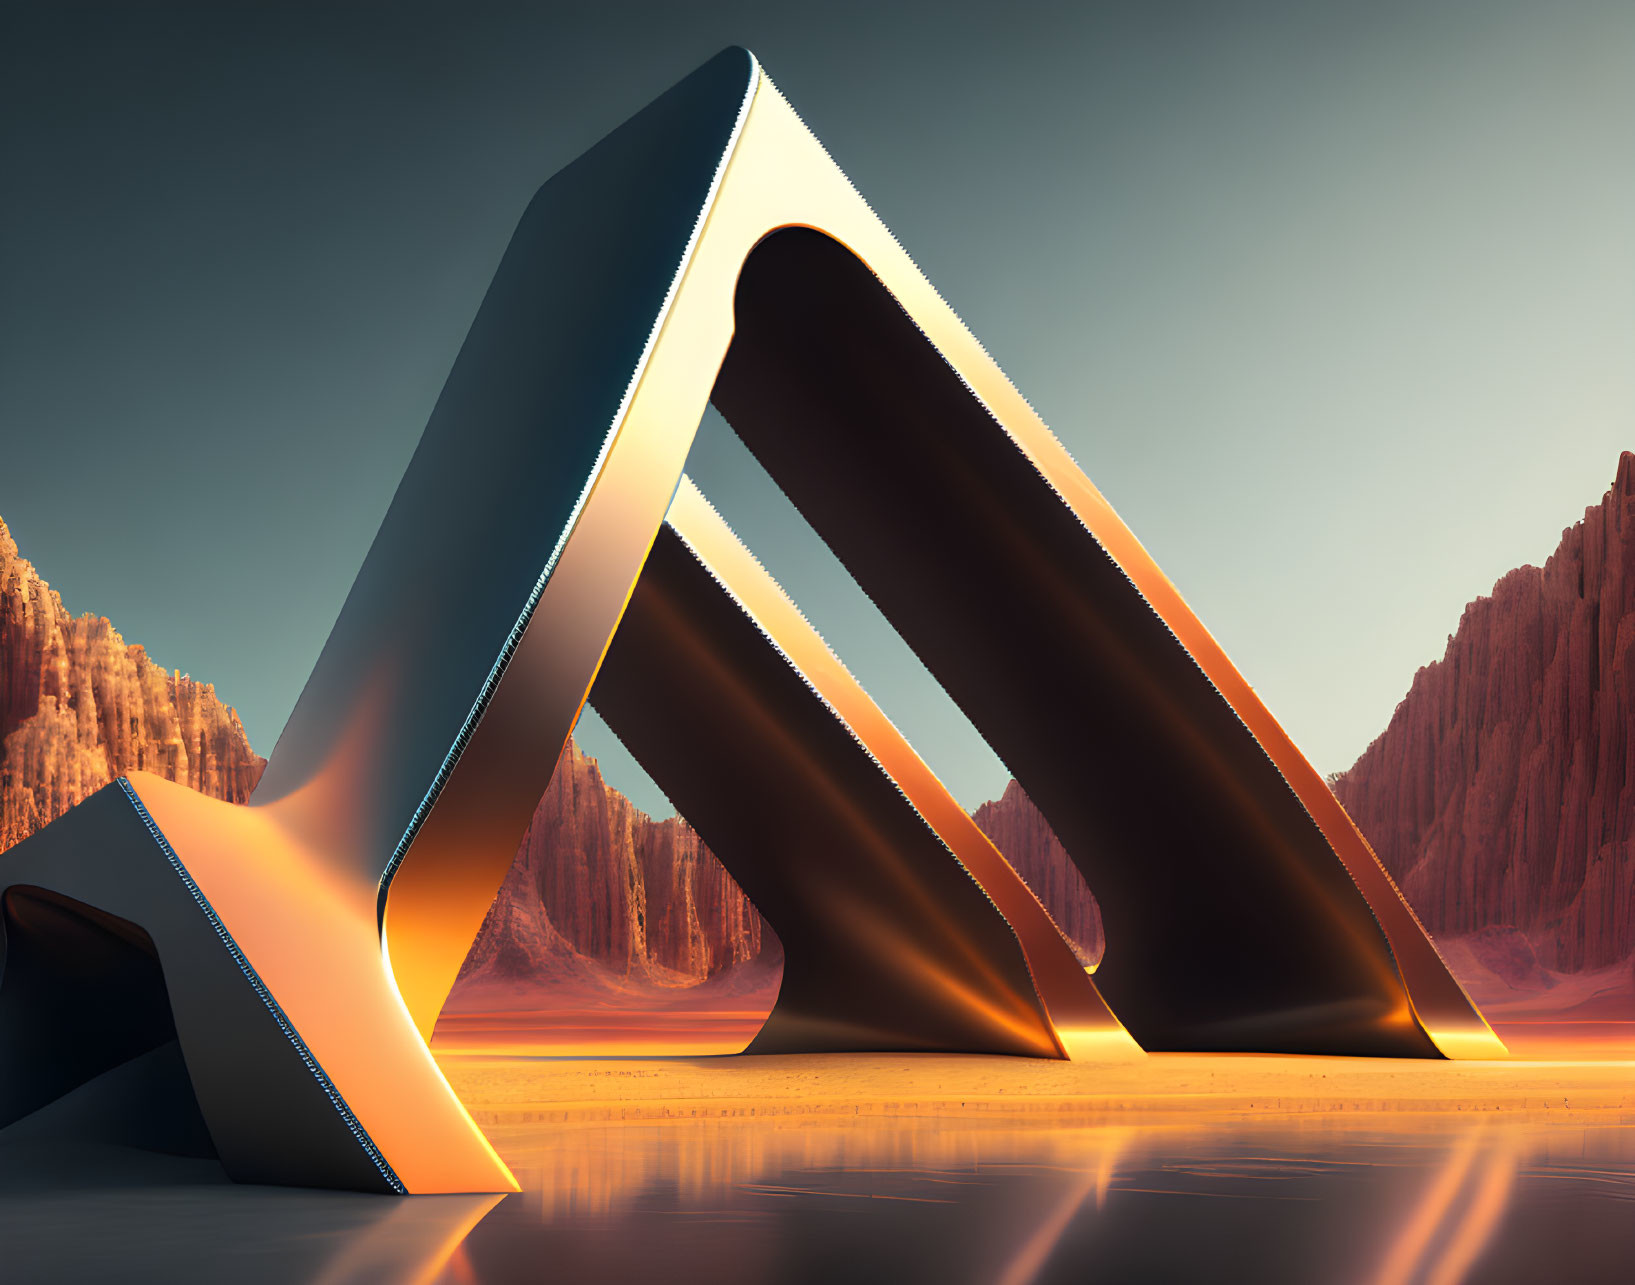 Futuristic metallic "A" structure in desert with cliffs and reflective surface